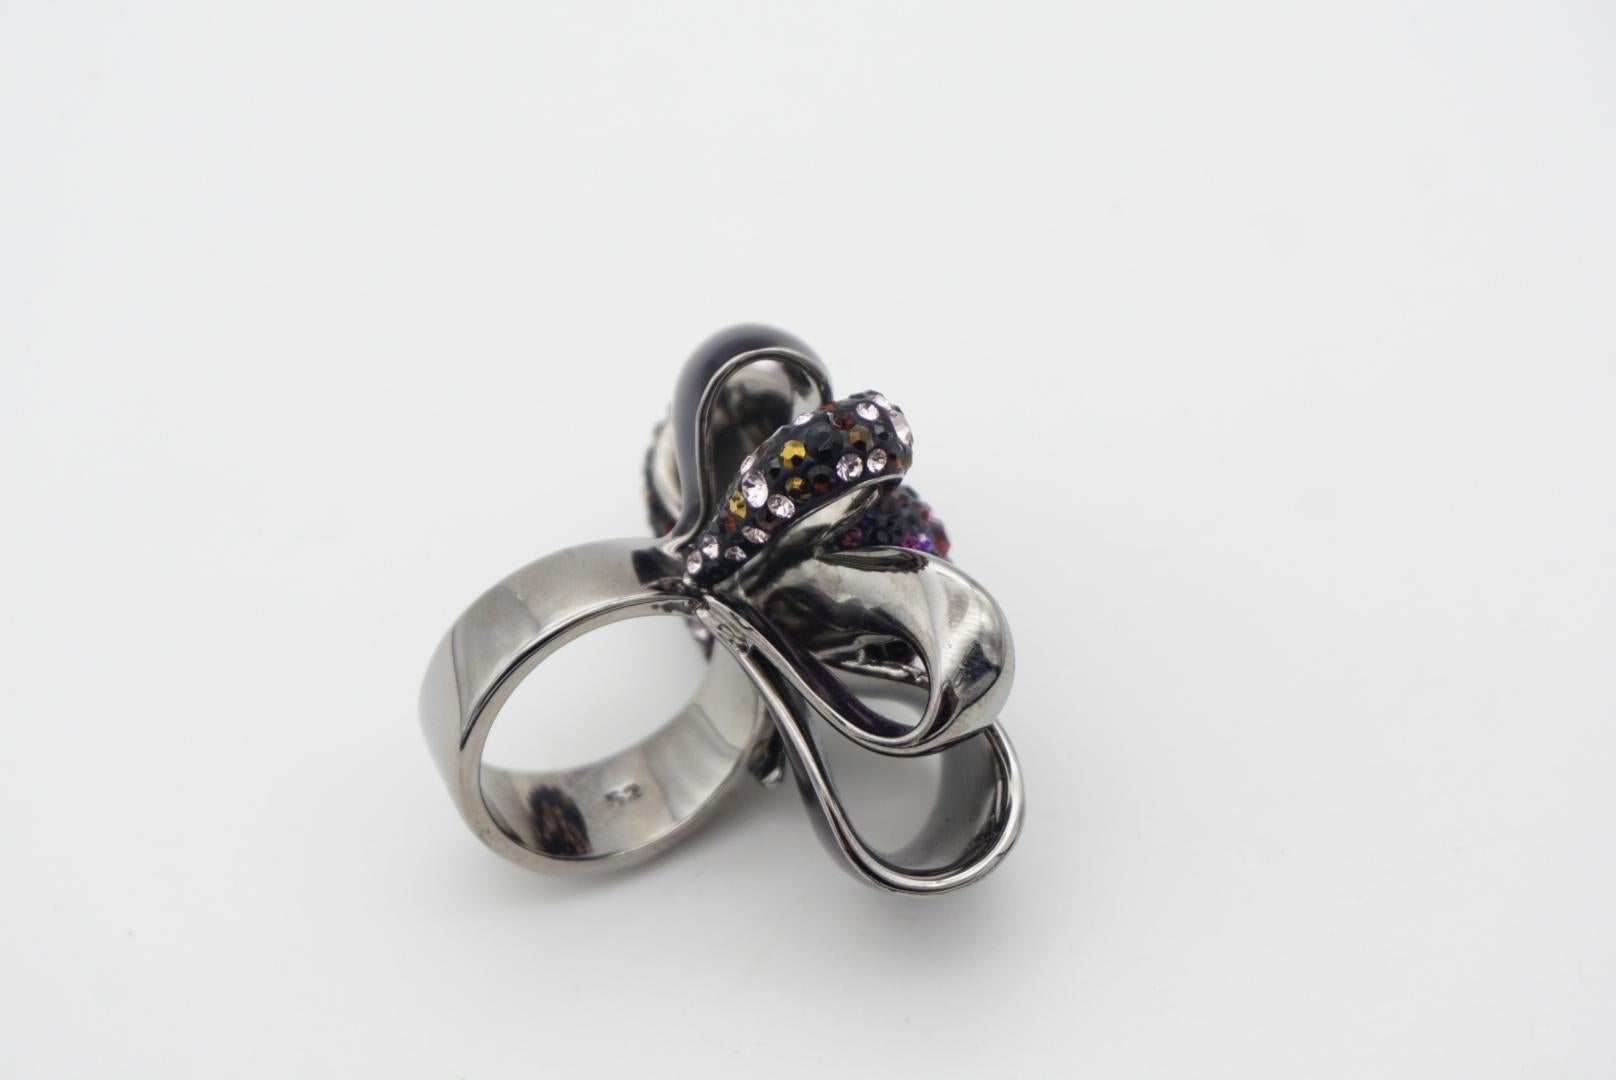 Aesthetic Movement Swarovski Nirvana Cocktail Purple Flower Ribbon Bow Ring, Silver Plated, Size 52 For Sale